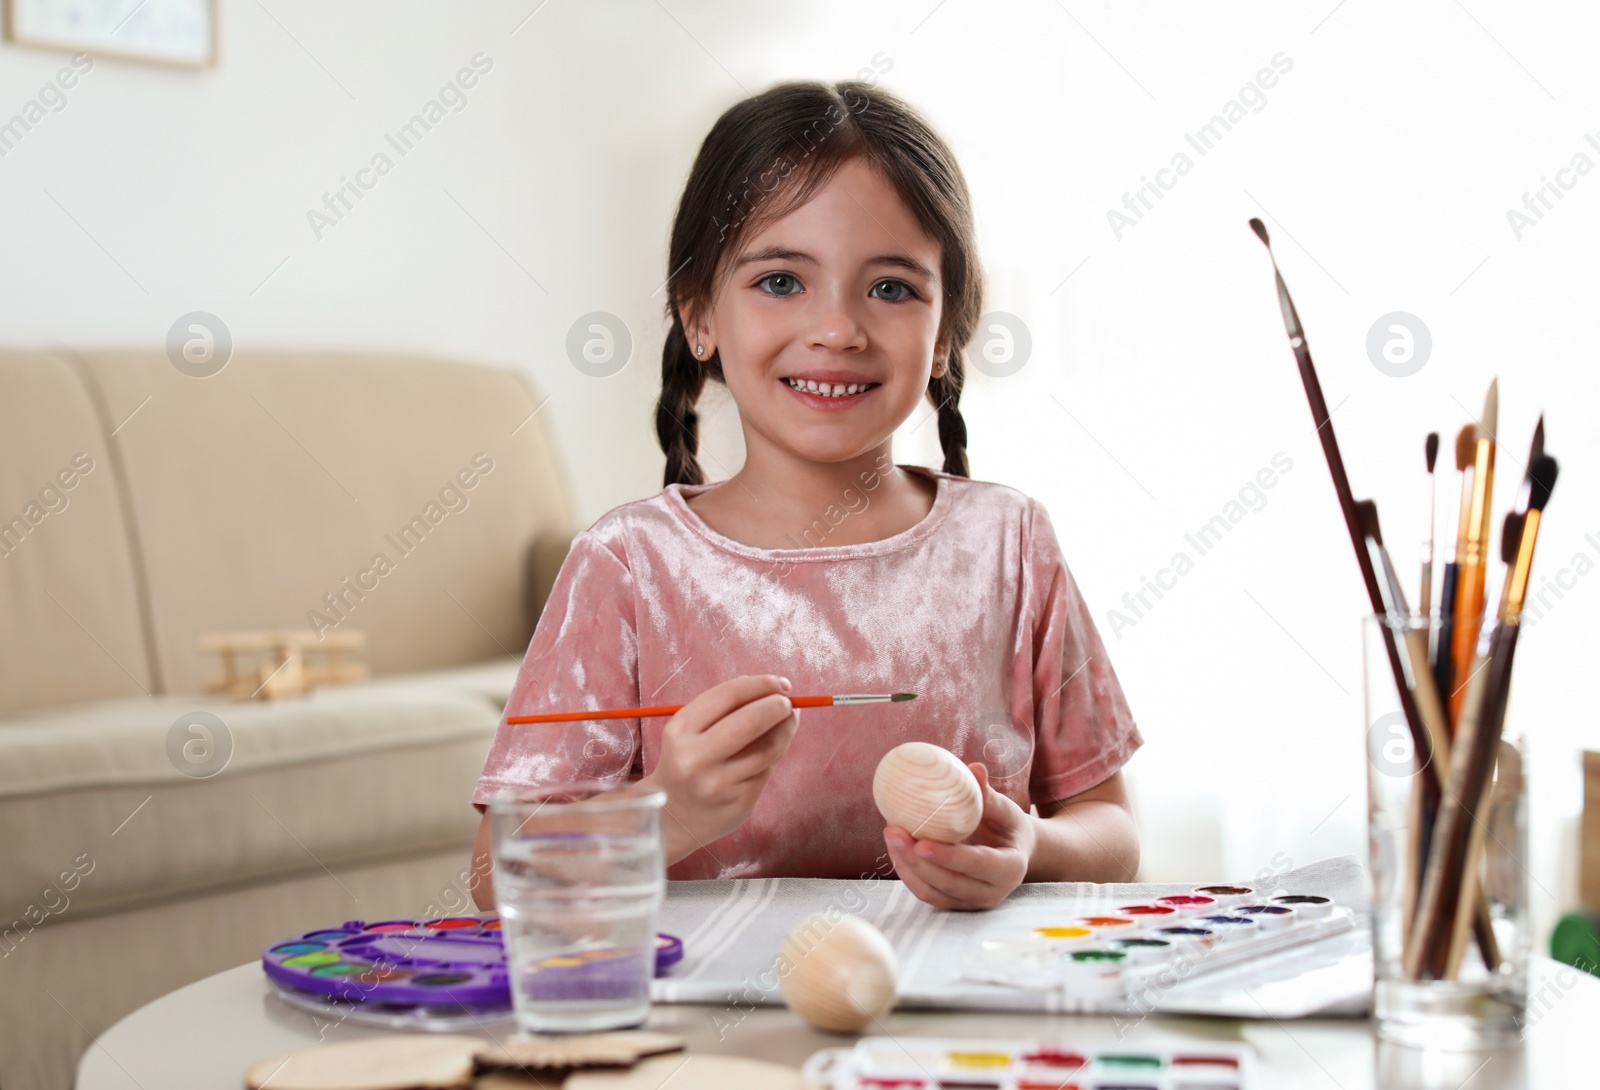 Photo of Little girl painting decorative egg at table indoors. Creative hobby